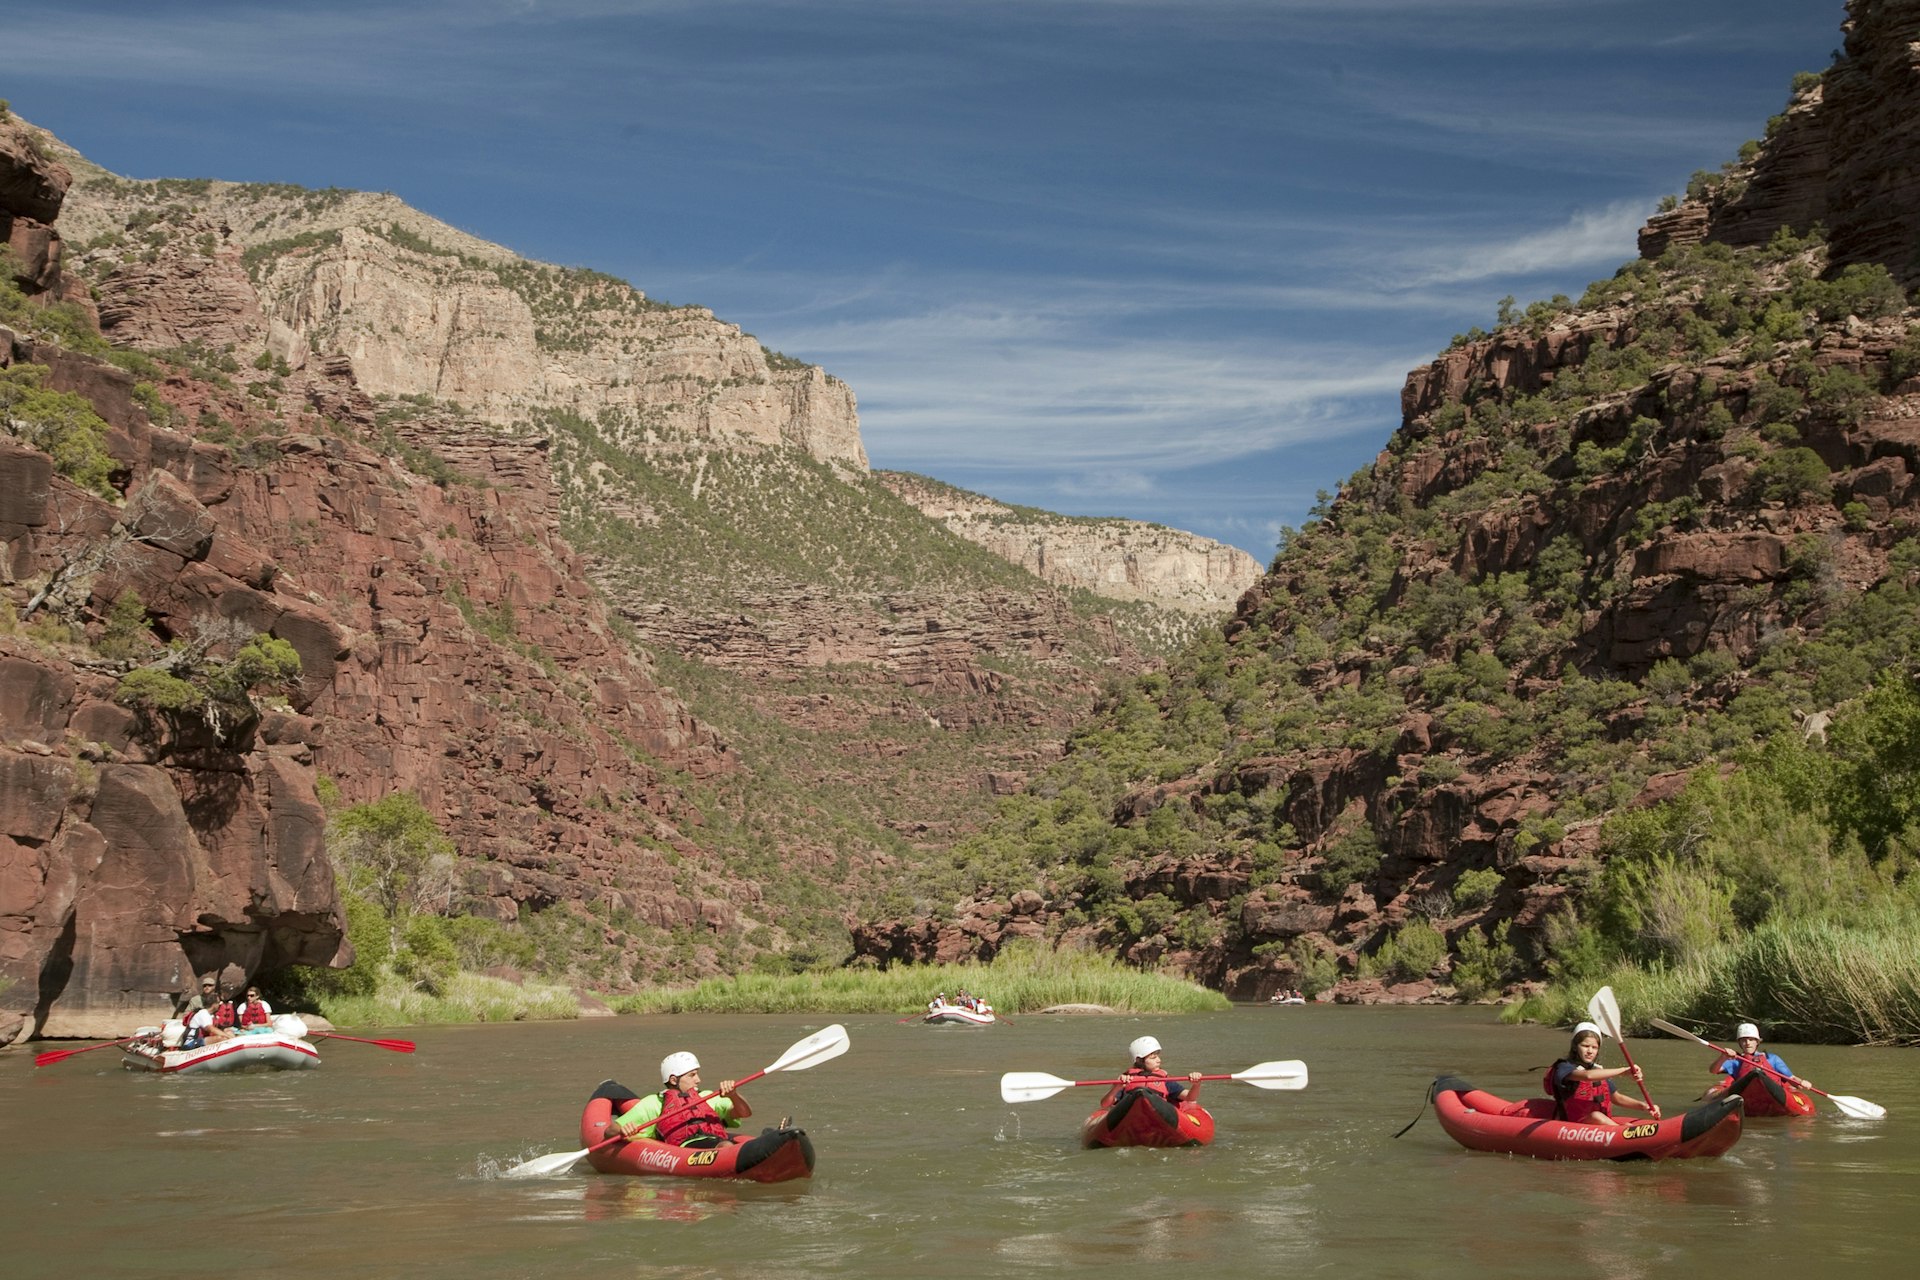 A group of people in red kayaks on a river in a gorge